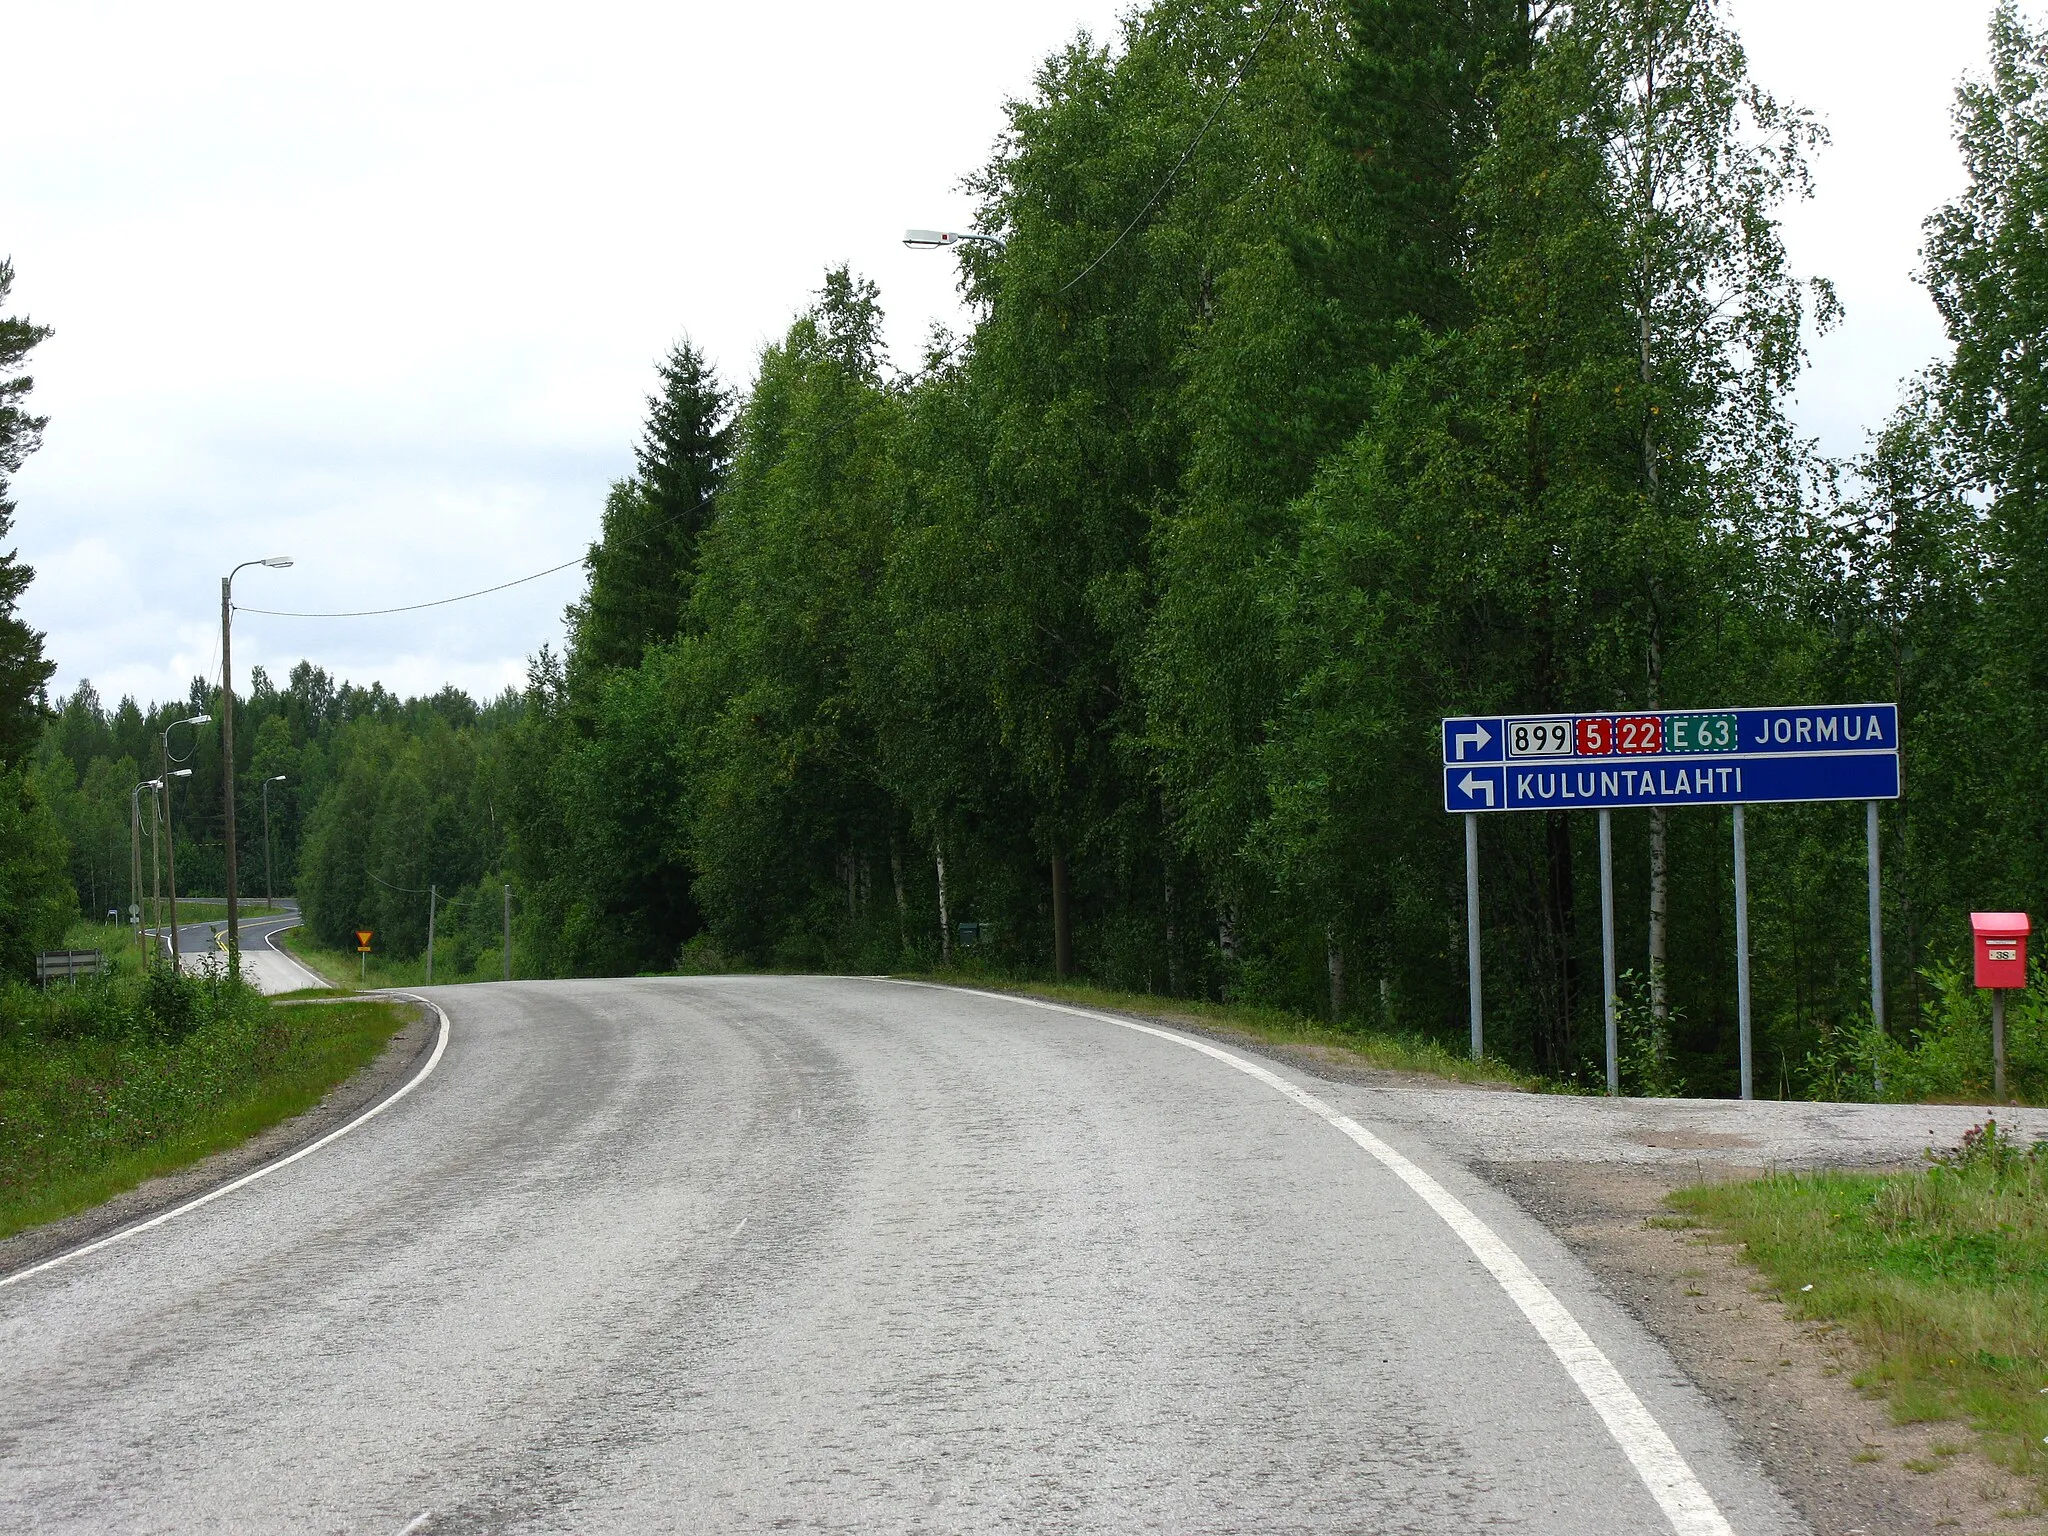 Photo showing: The Finnish regional road 899 at Jormua towards North-West, the end of the road.